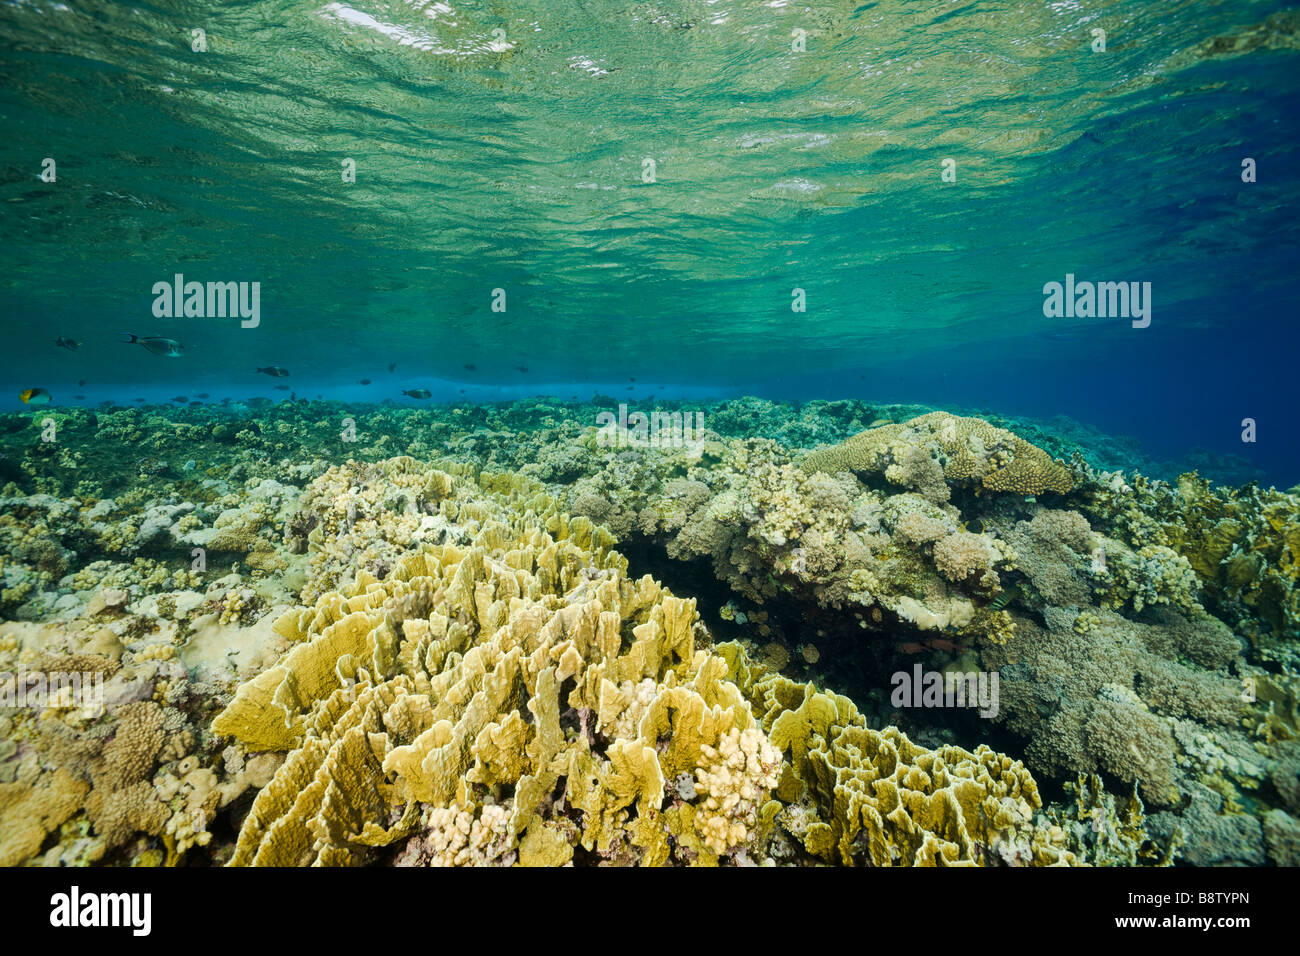 Fire Corals and Hard Corals Millepora Acropora Ras Mohammed Sinai Red Sea Egypt Stock Photo